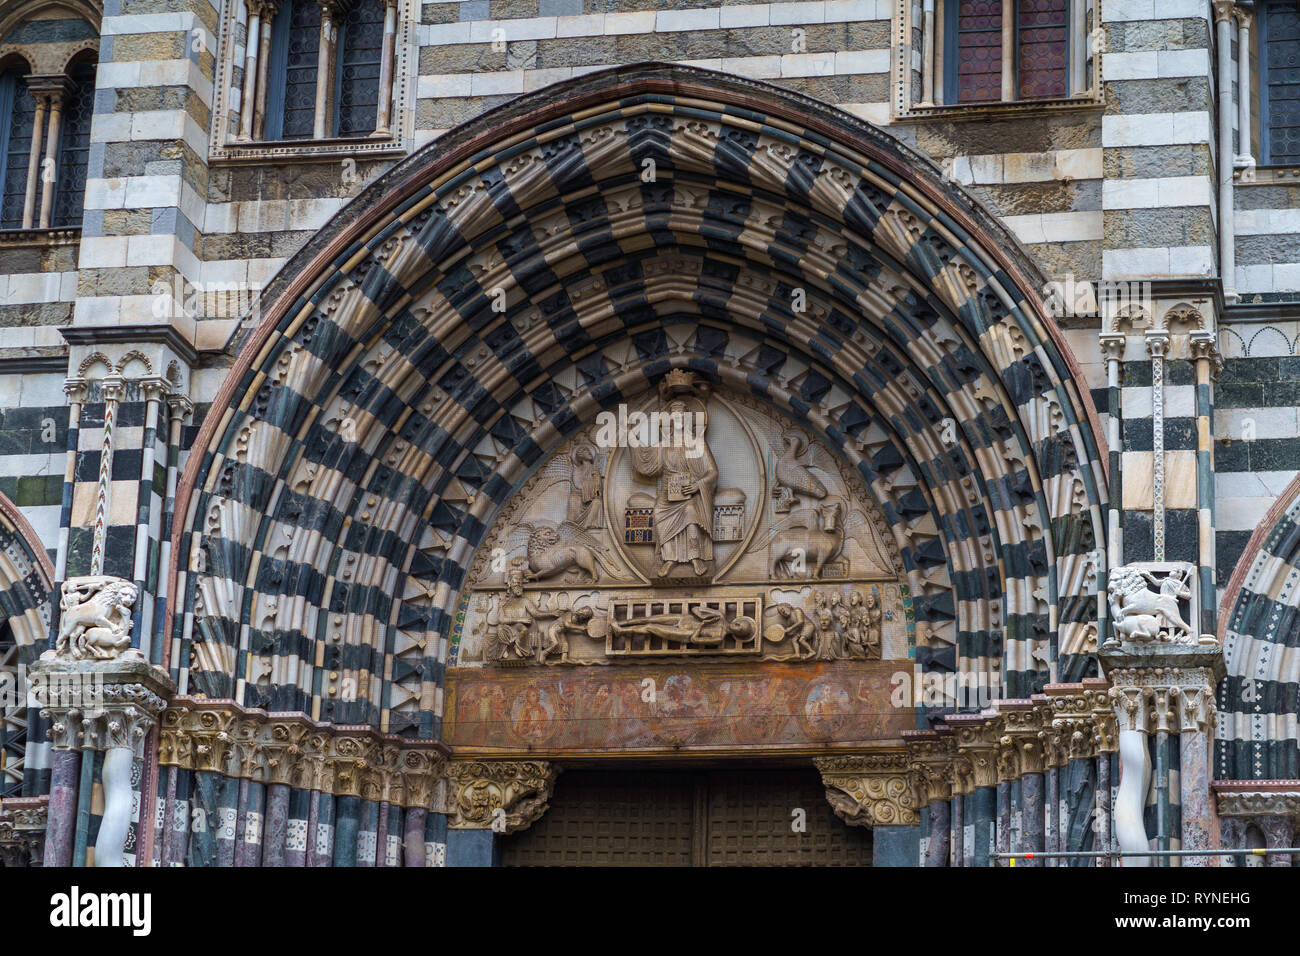 GENOA, ITALY - NOVEMBER 4, 2018: Exterior of Cattedrale di San Lorenzo or Cathedral of Saint Lawrence Stock Photo